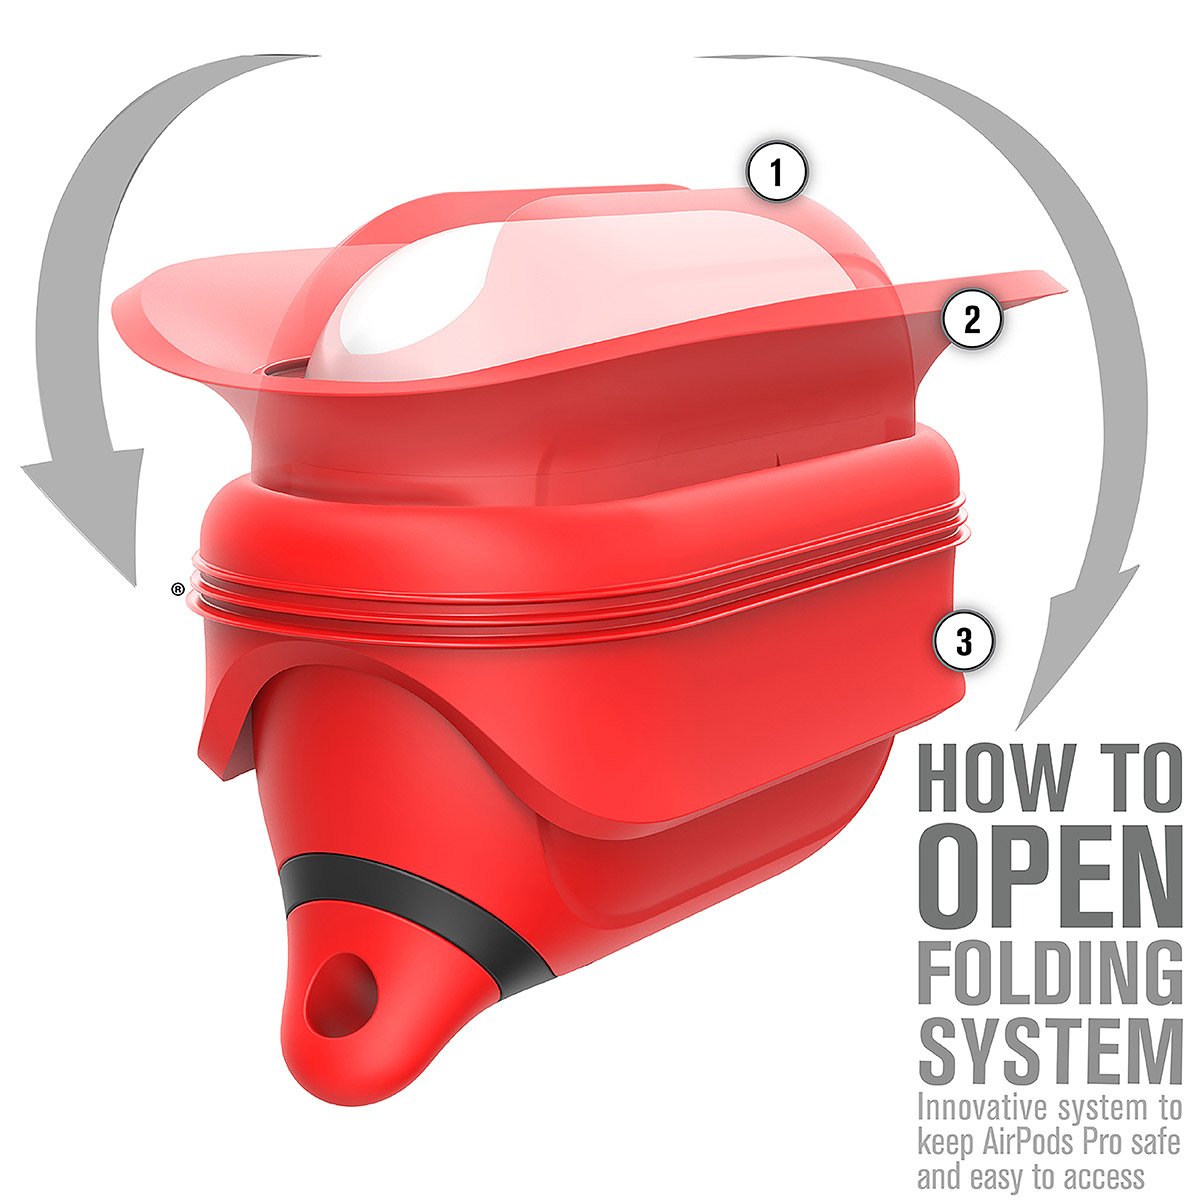 CATAPDPRORED | catalyst airpods pro gen 2 1 waterproof case carabiner flame red with arrows on how to open the case text reads how to open folding system innovative system to keep airpods pro safe and easy to access